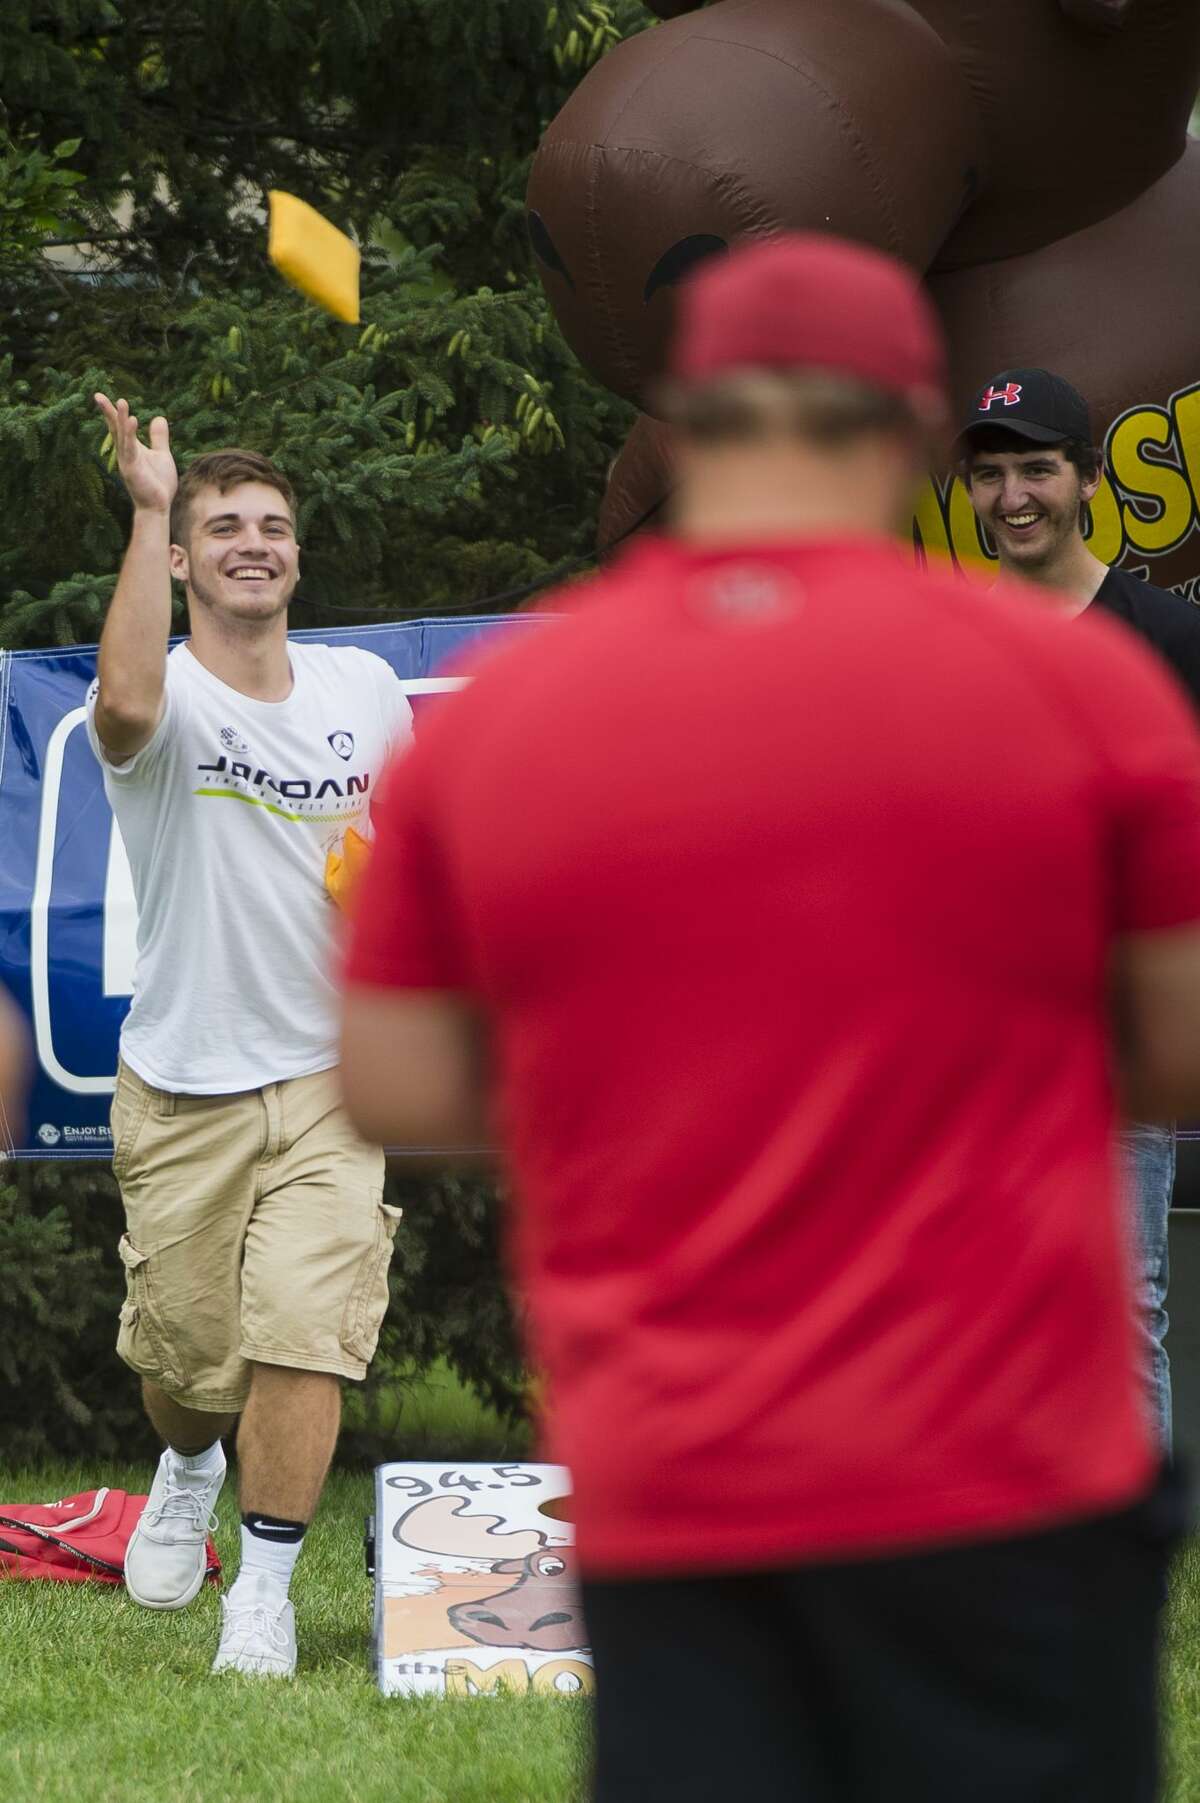 Chad Mielke of Beaverton, left, and Ronnie Remer of Beaveron, right, compete in a cornhole tournament during Riverdays on Friday.